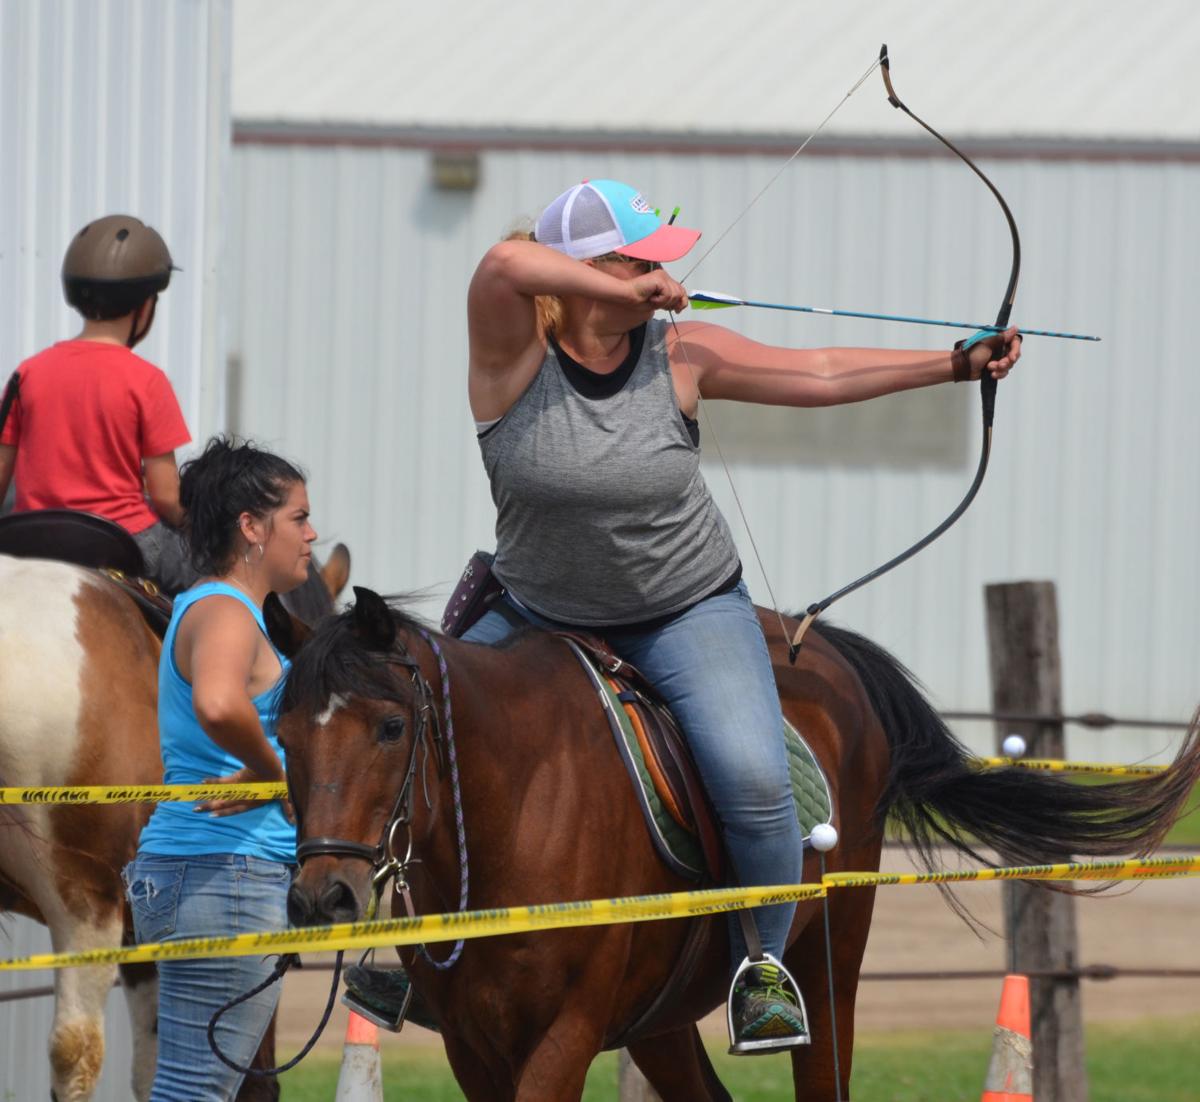 Right on target: New club combines horseback riding and archery